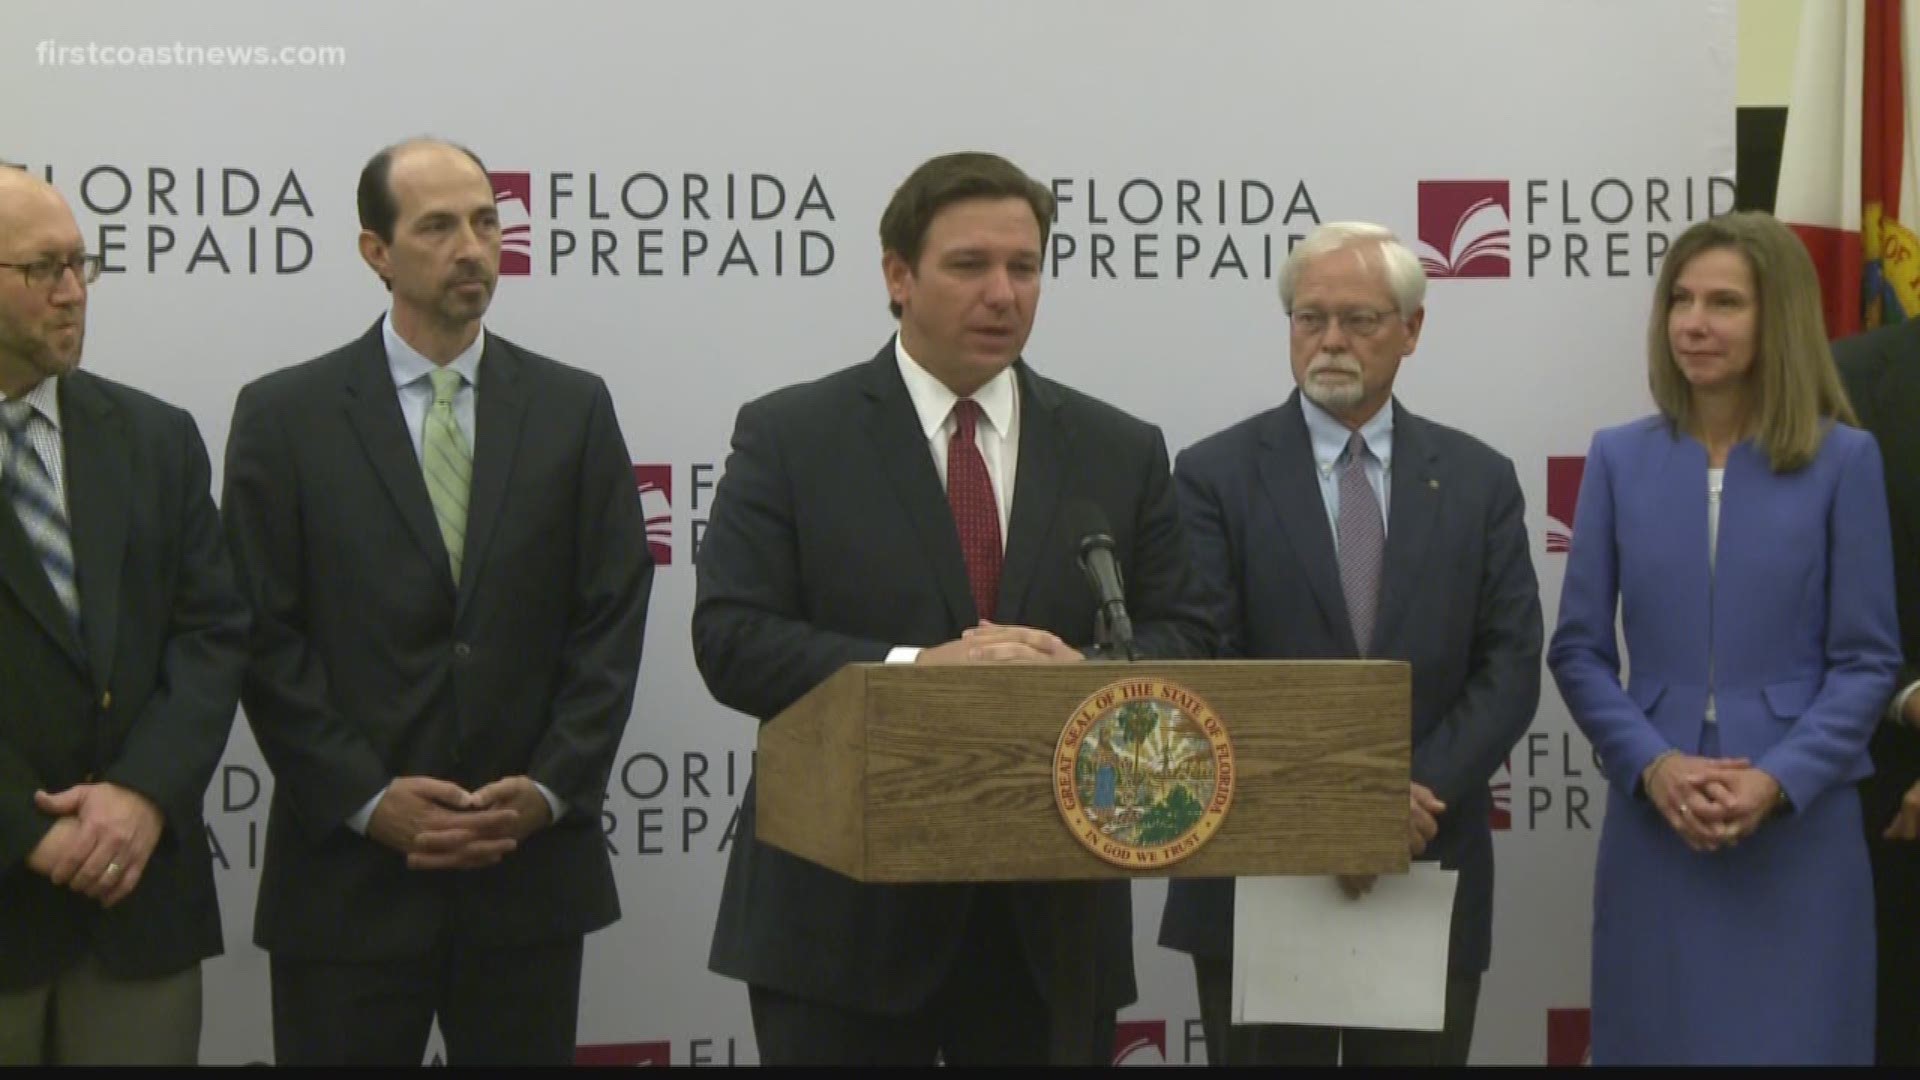 He says the reduction will save Floridians $1.3 billion and will benefit 224,000 current Florida Prepaid customers.